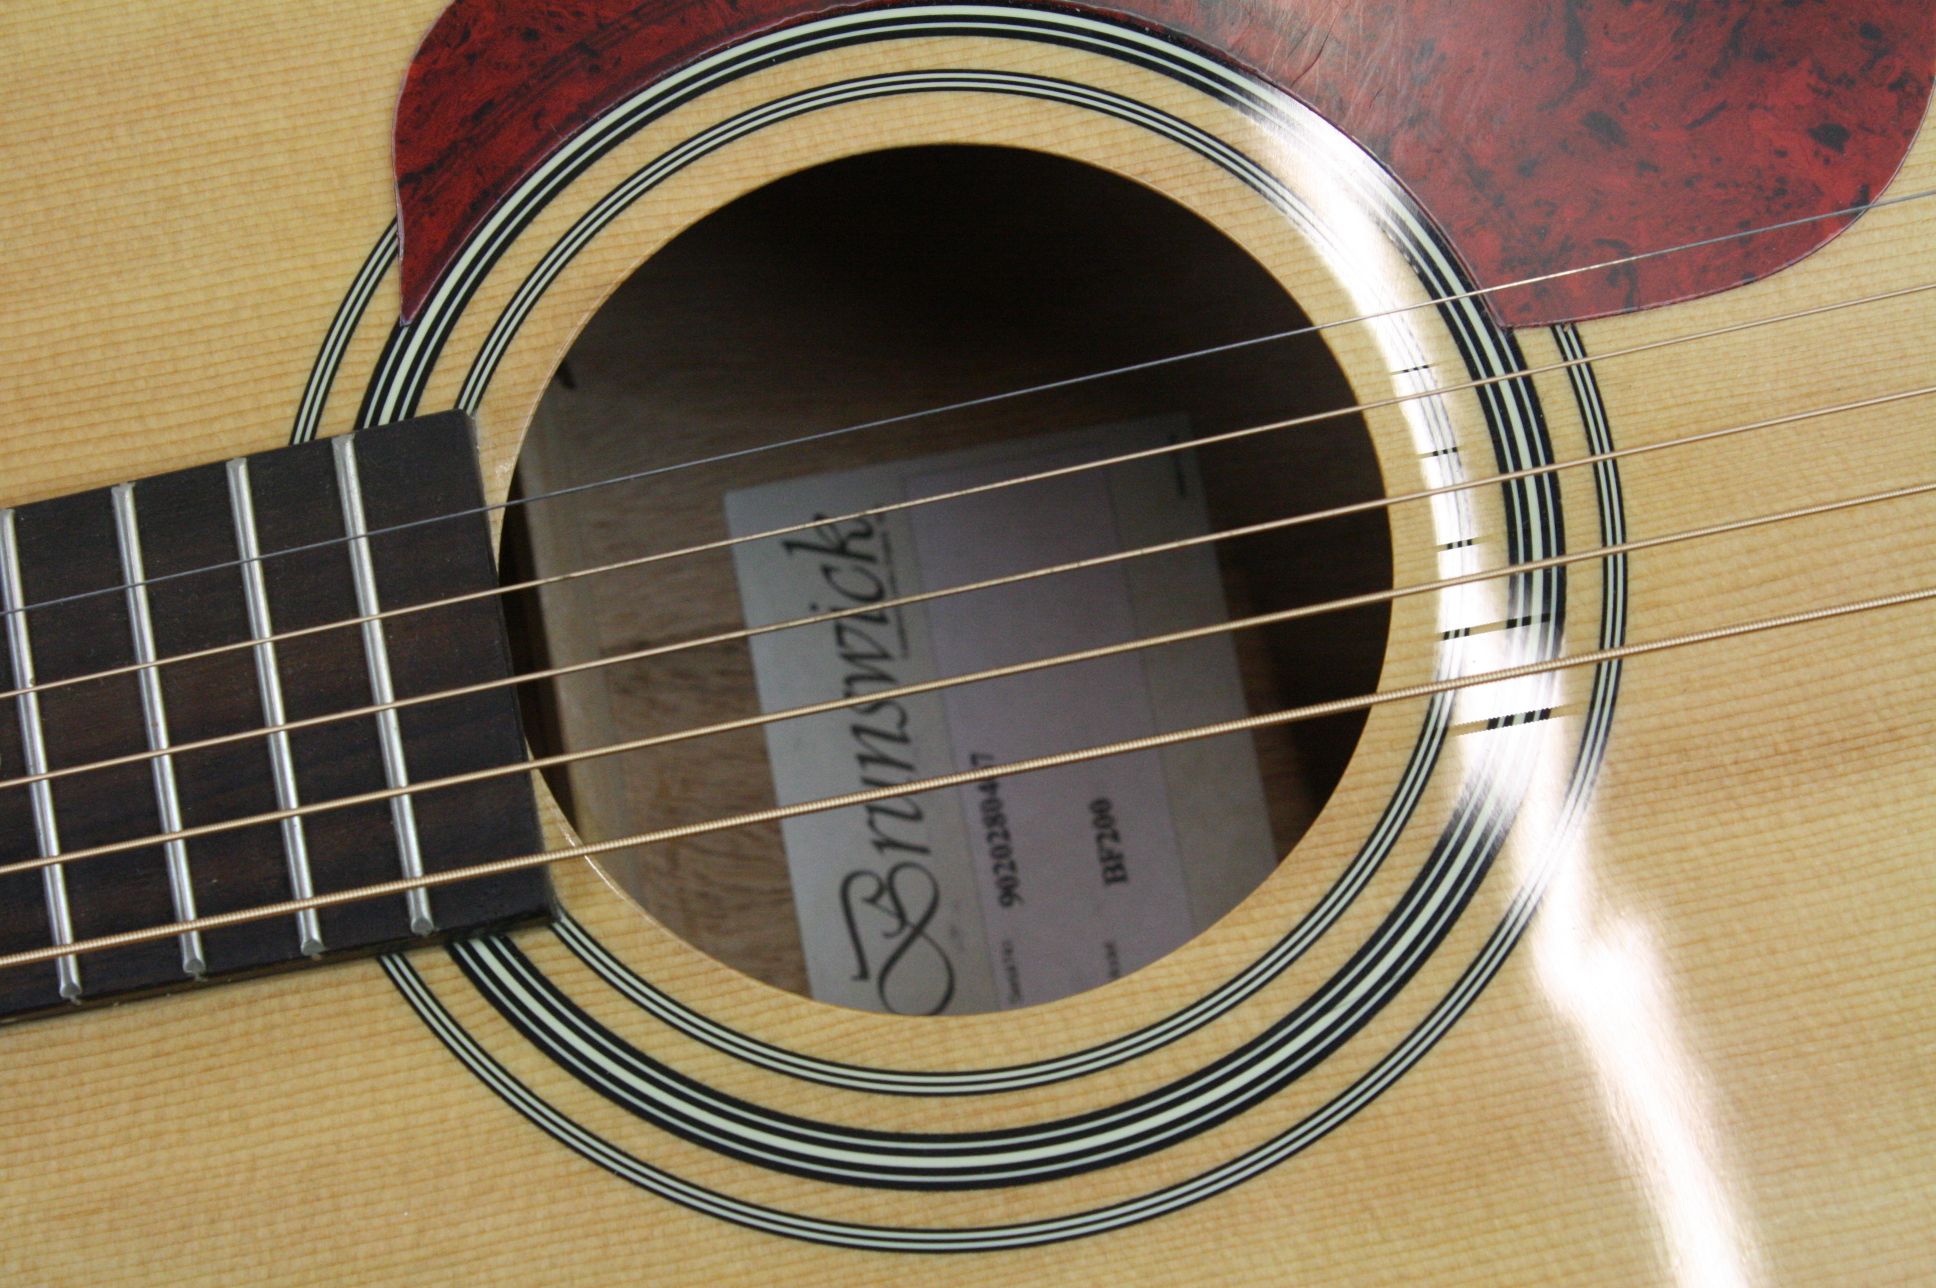 Guitar - A Brunswick BF200 acoustic guitar in natural finish, along with a gig bag. Good condition. - Image 5 of 6